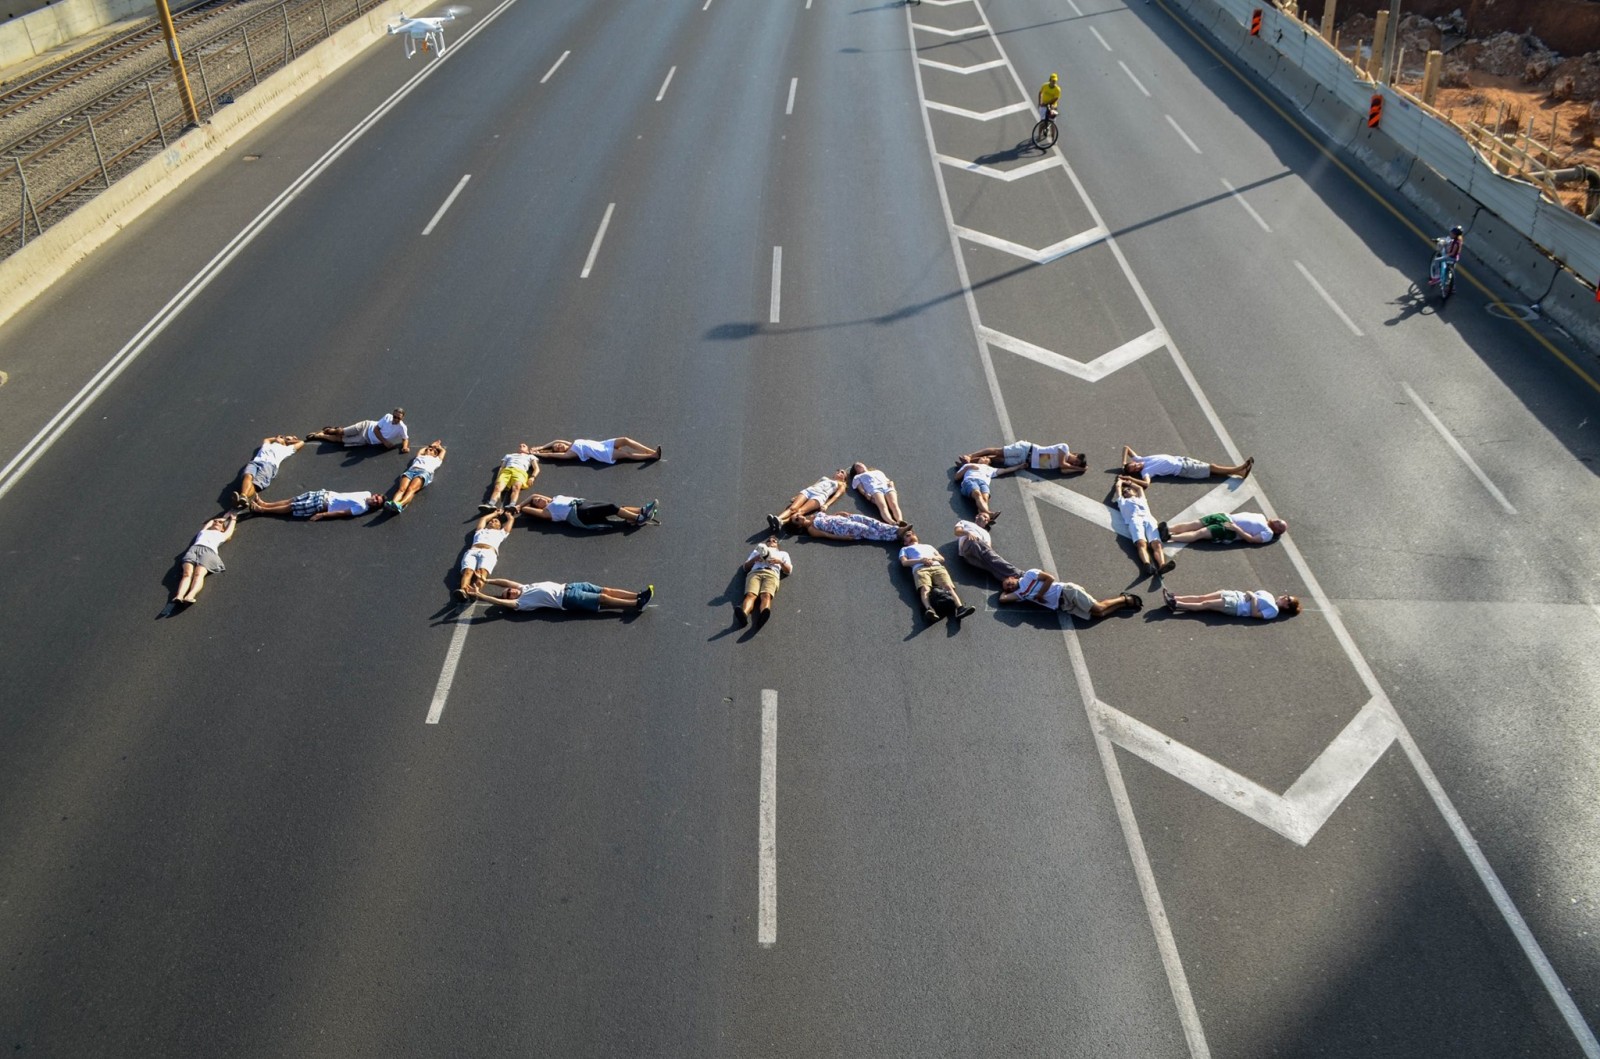 Joy Records and friends took to the quiet roads to send a message of peace. Photo Credit: Shlomi Levi 